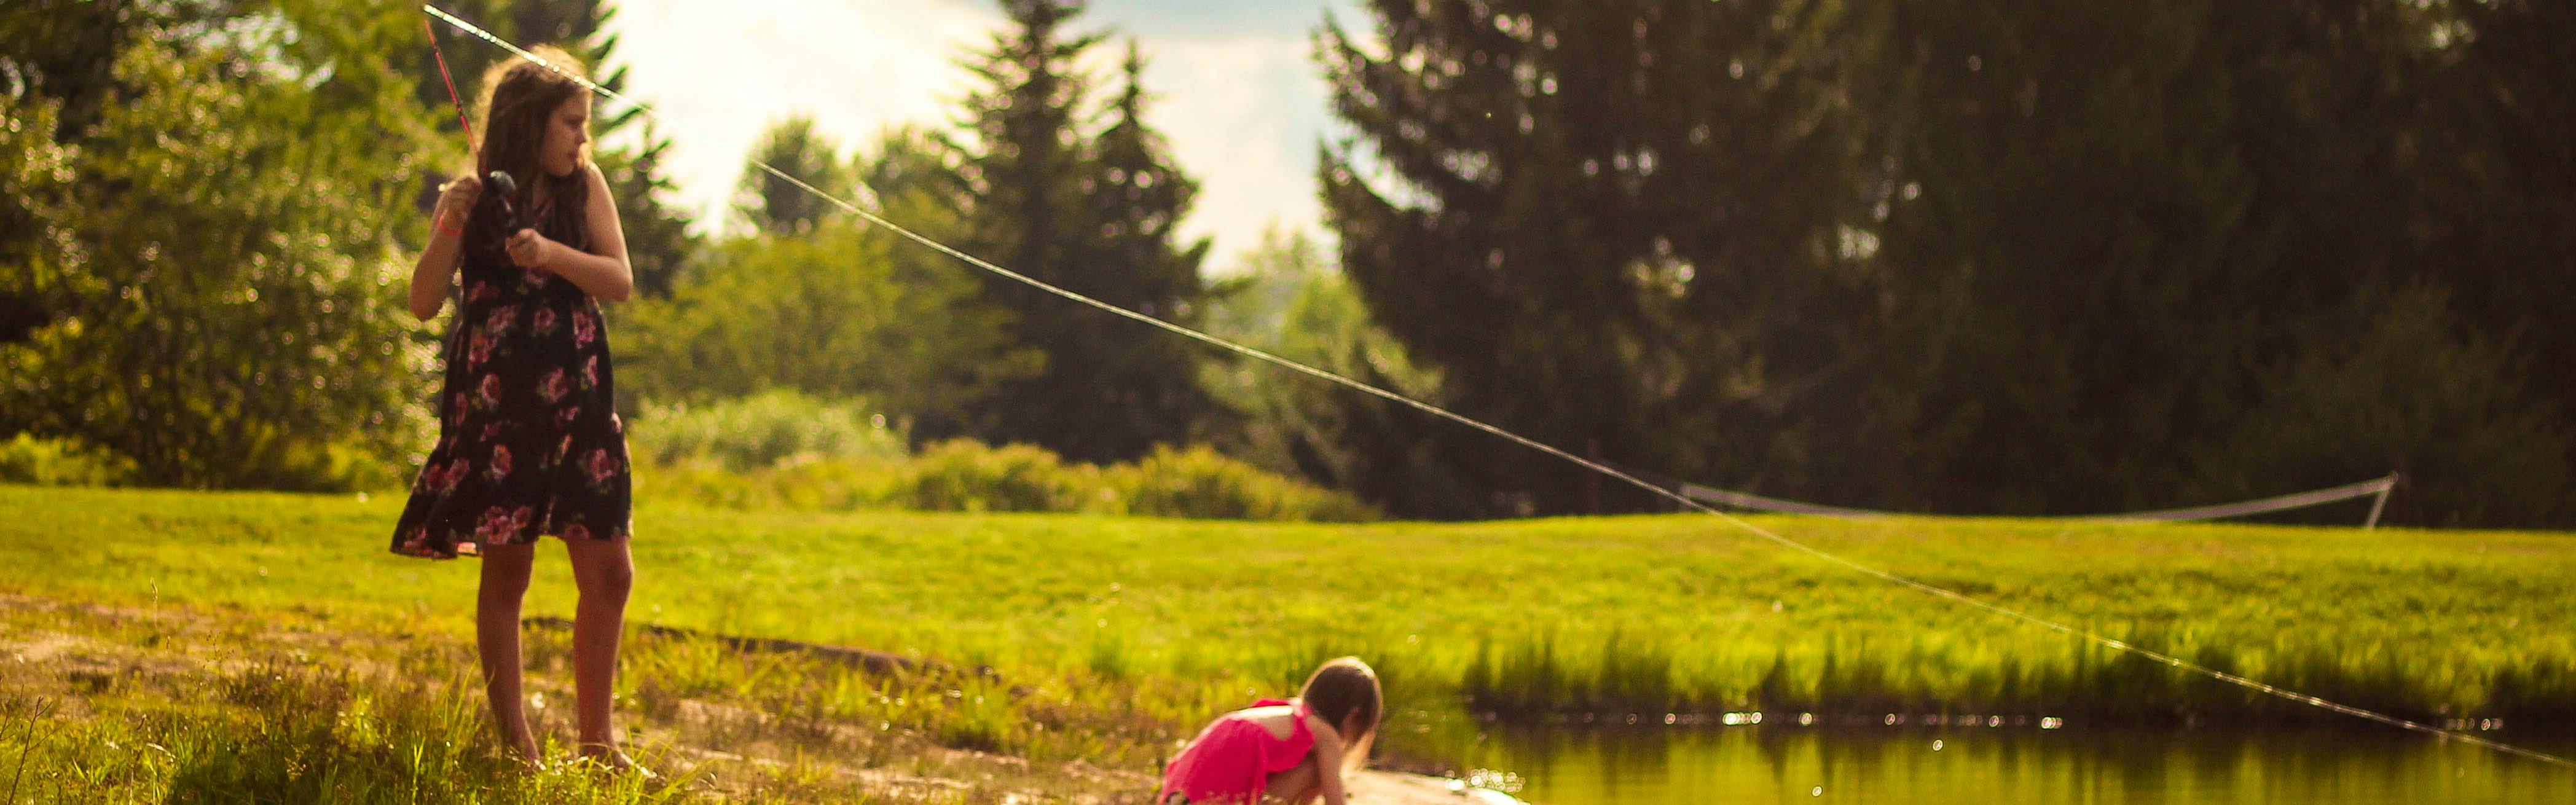 A girl in a dress stands barefoot on the grassy banks of a pond and pulls back a fishing rod. Another younger girl crouches and plays in the mud.